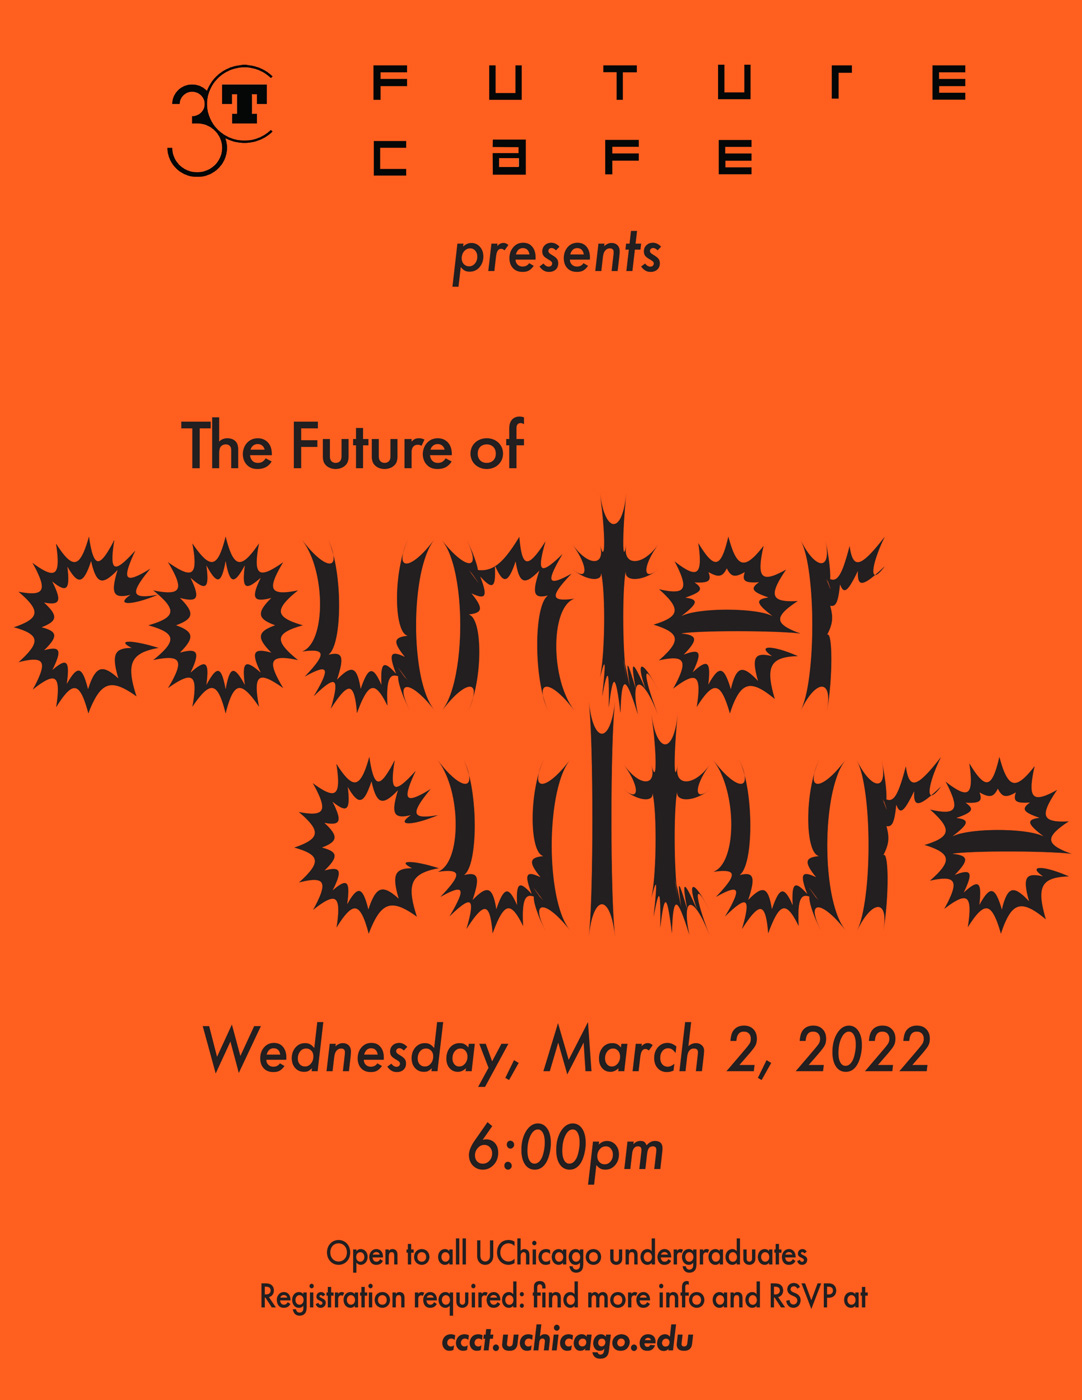 event poster with black text on orange background